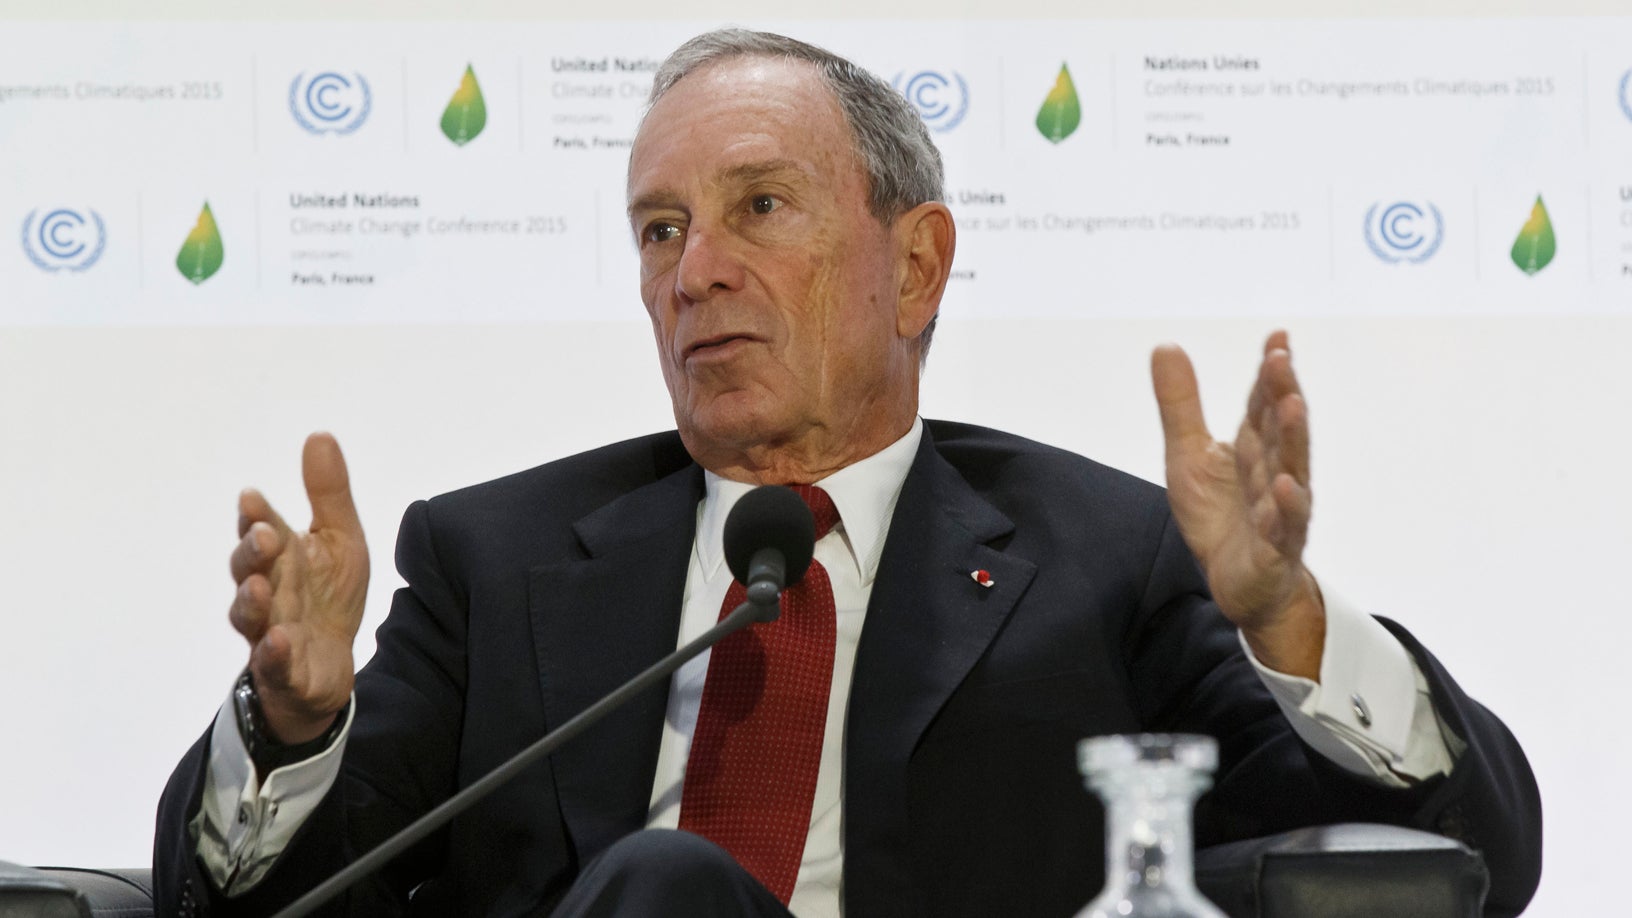  Former New York City Mayor Michael Bloomberg gestures as he speaks during a panel discussion on 'Climate Change and Financial Markets' at the COP21, United Nations Climate Change Conference, in Le Bourget north of Paris, Friday, Dec. 4, 2015. (Michel Euler/AP Photo) 